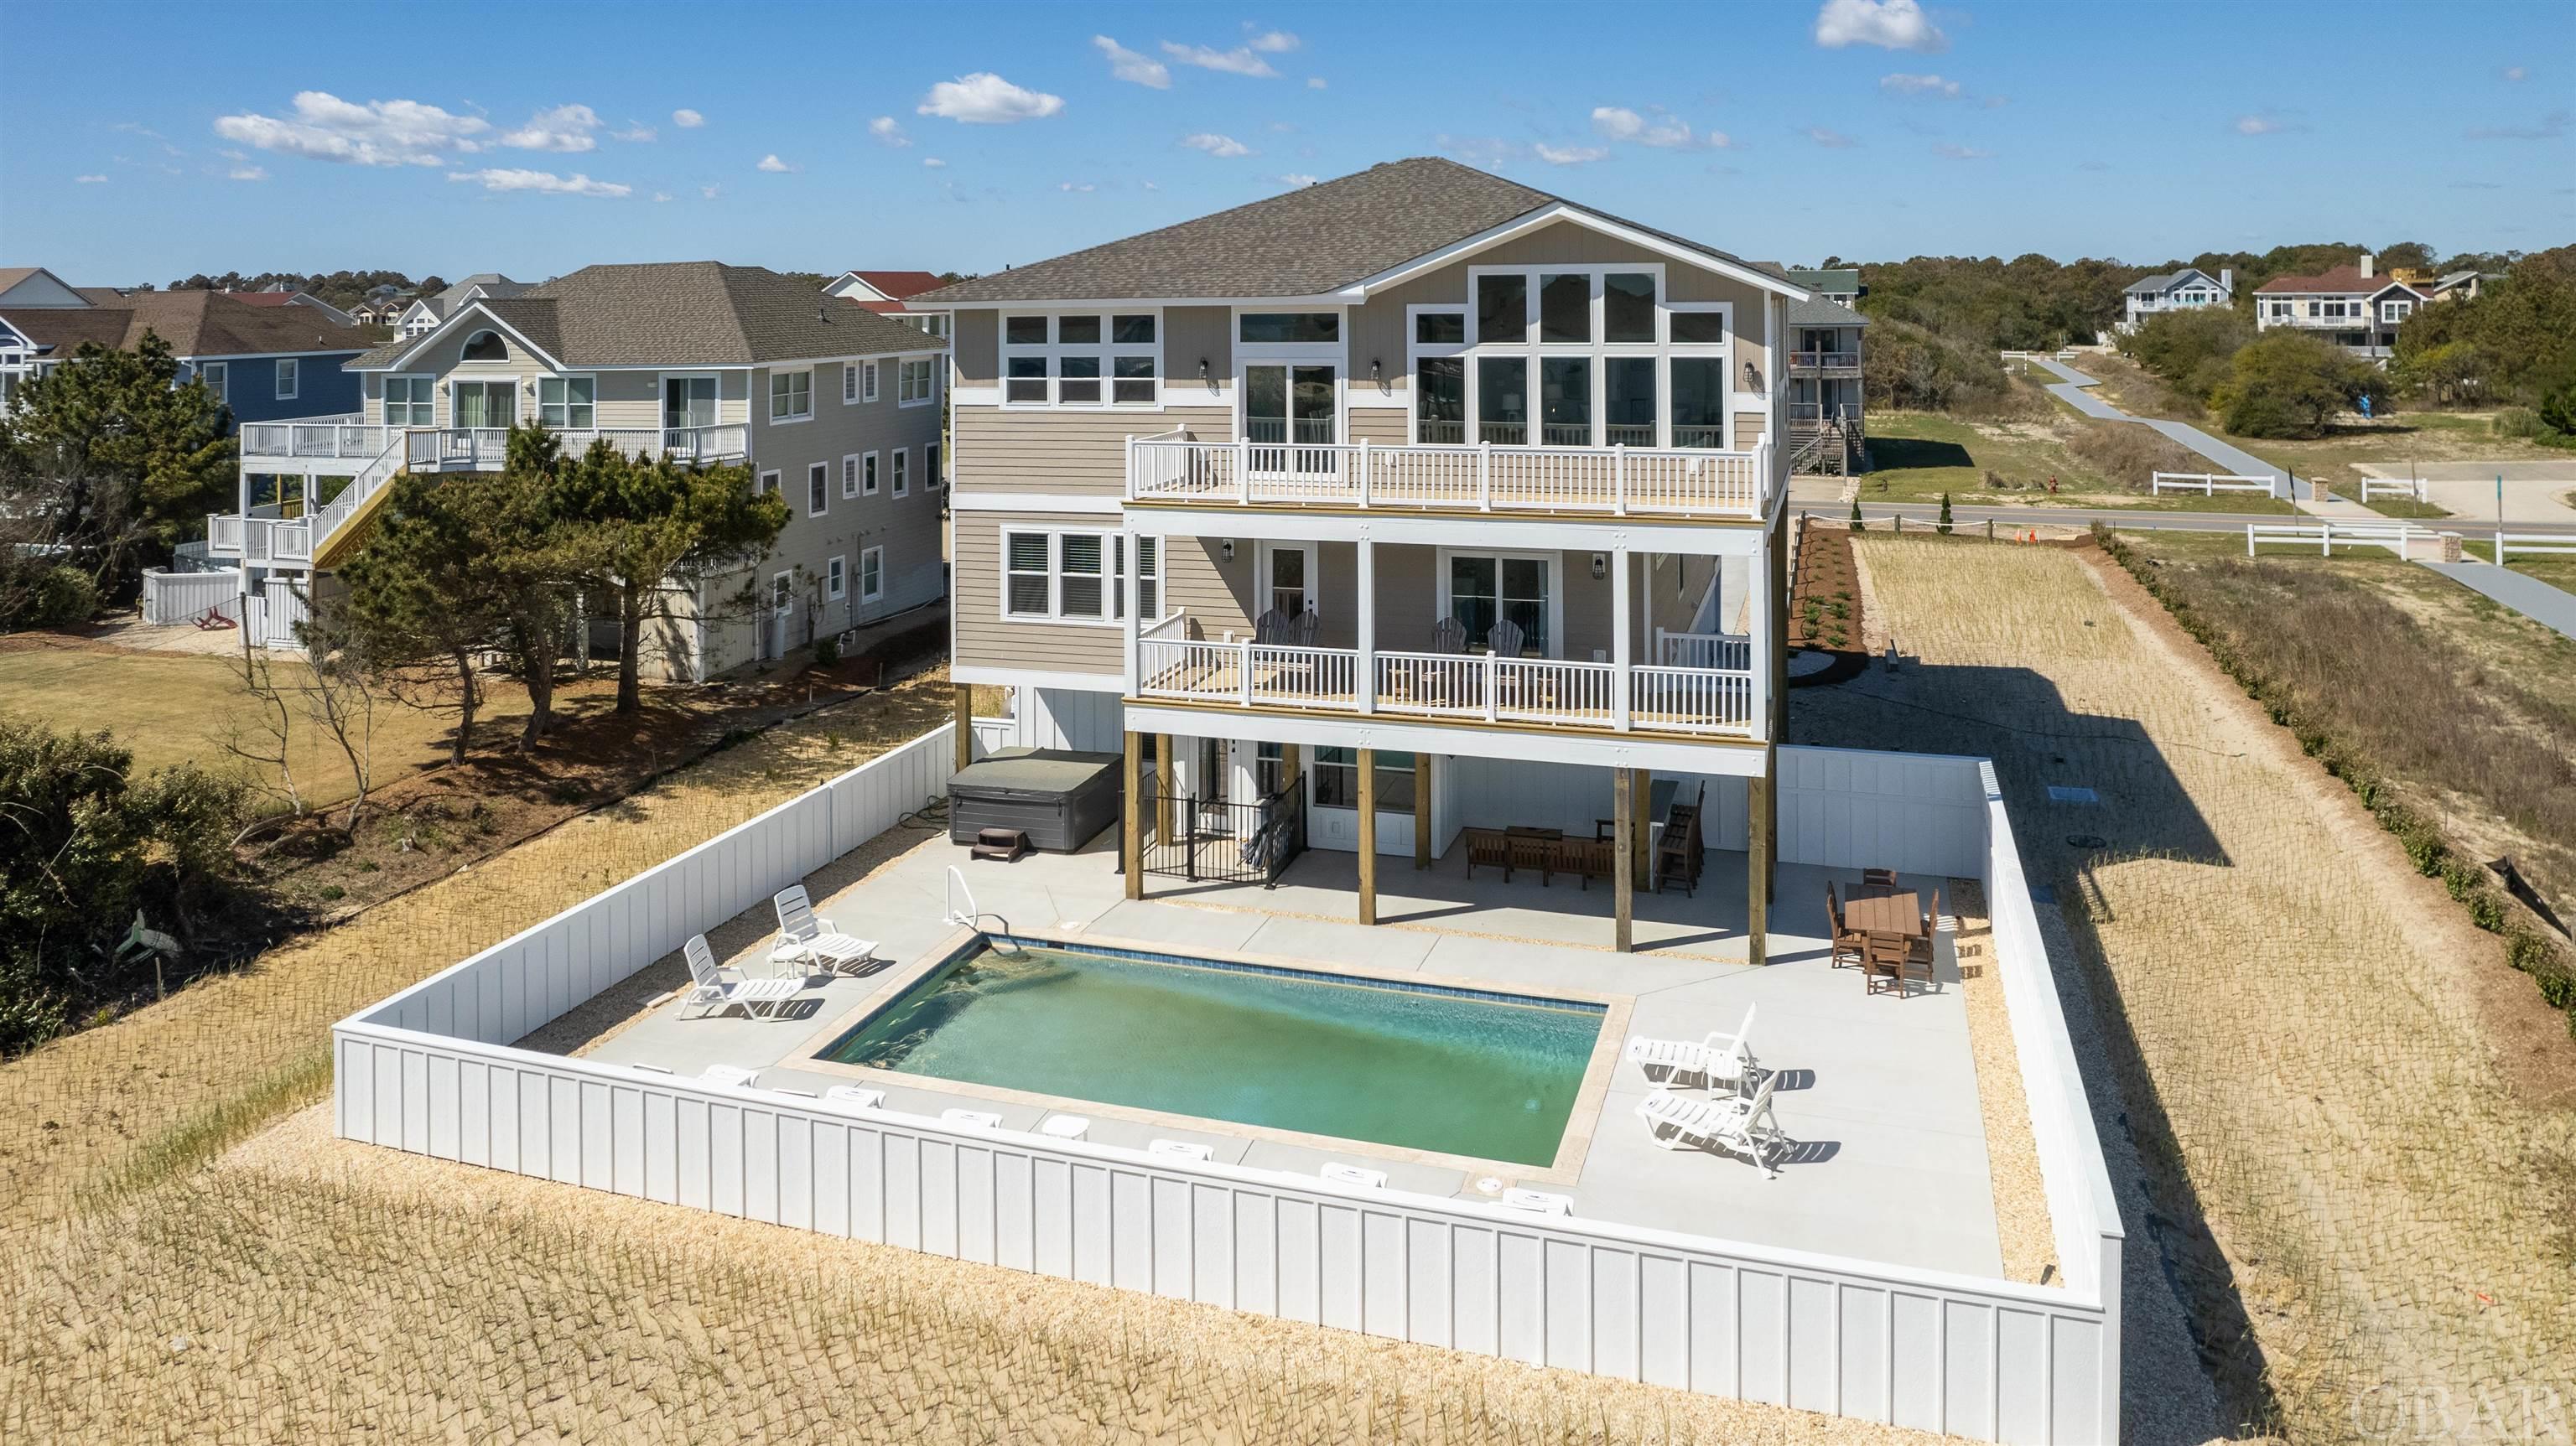 871 Whalehead Drive, Corolla, NC 27927, 12 Bedrooms Bedrooms, ,12 BathroomsBathrooms,Residential,For sale,Whalehead Drive,125248